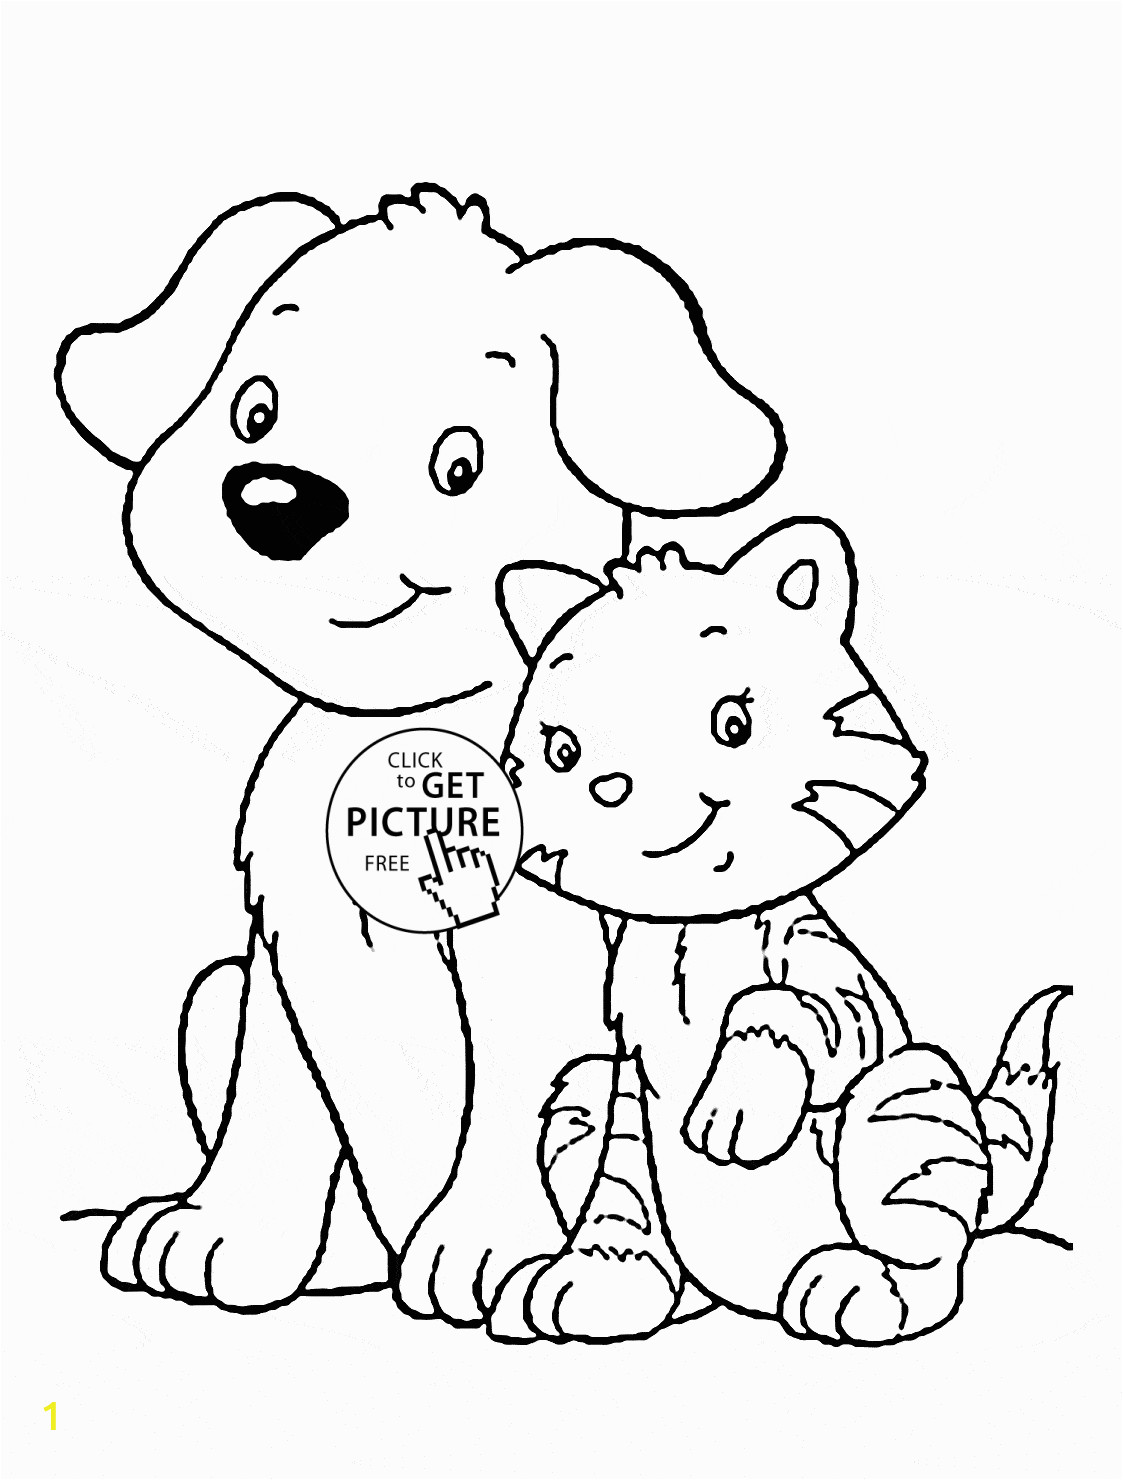 Free Cat and Dog Coloring Pages Free Coloring Pages Dog and Kat Coloring Home